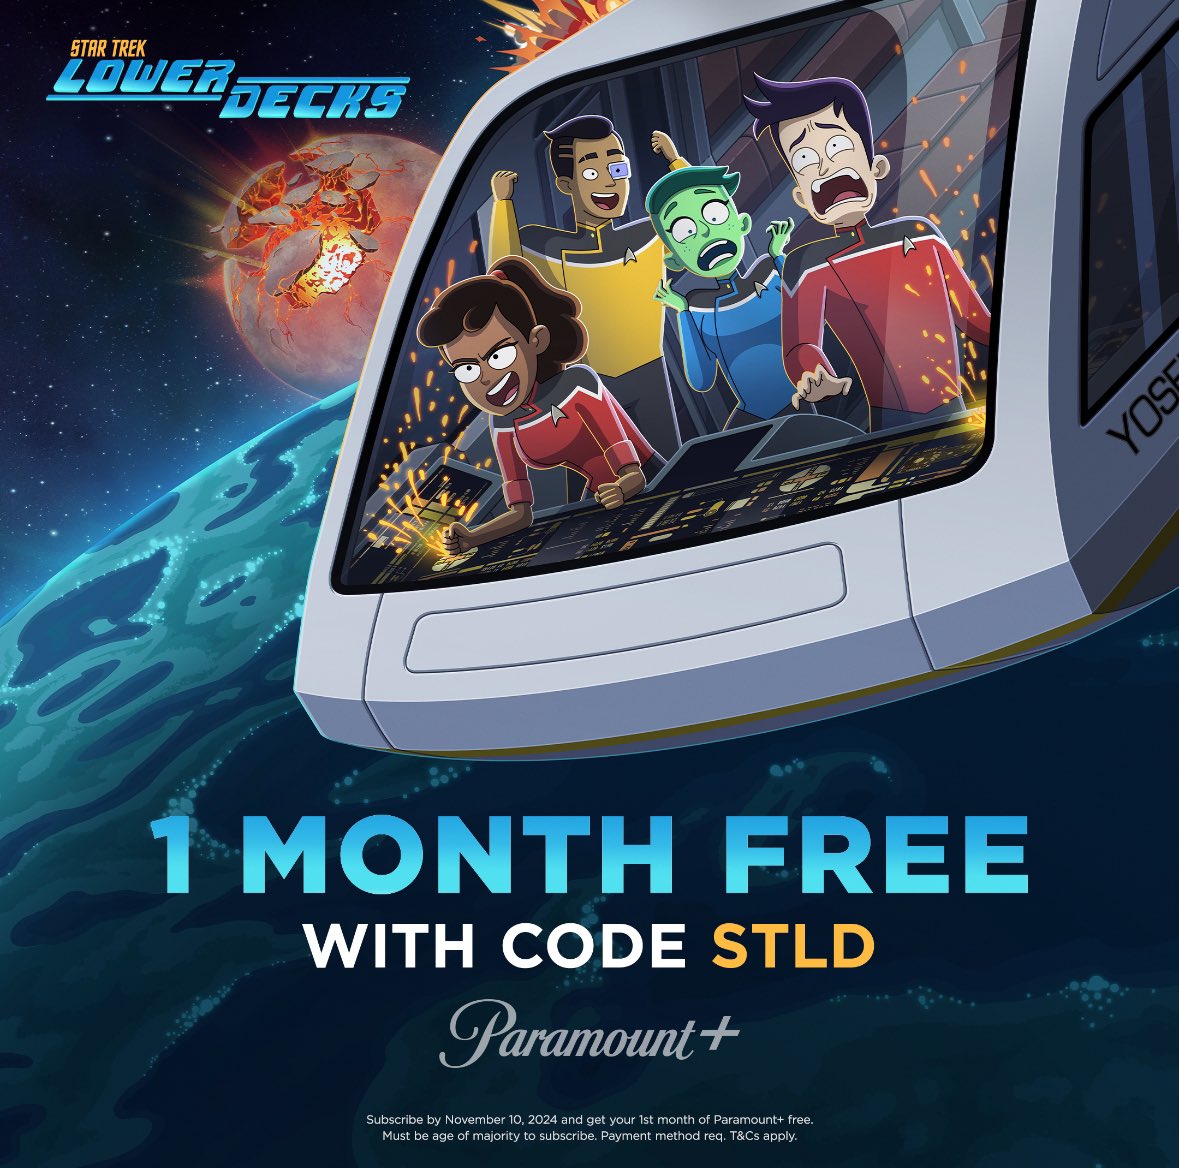 🖖🏻I can post about things again?! This is exciting! Want to watch all of #StarTrekLowerDecks for FREE? Use code STLD for a free month of paramount plus. It expires by the end of the day, so use it now! #LowerDecks